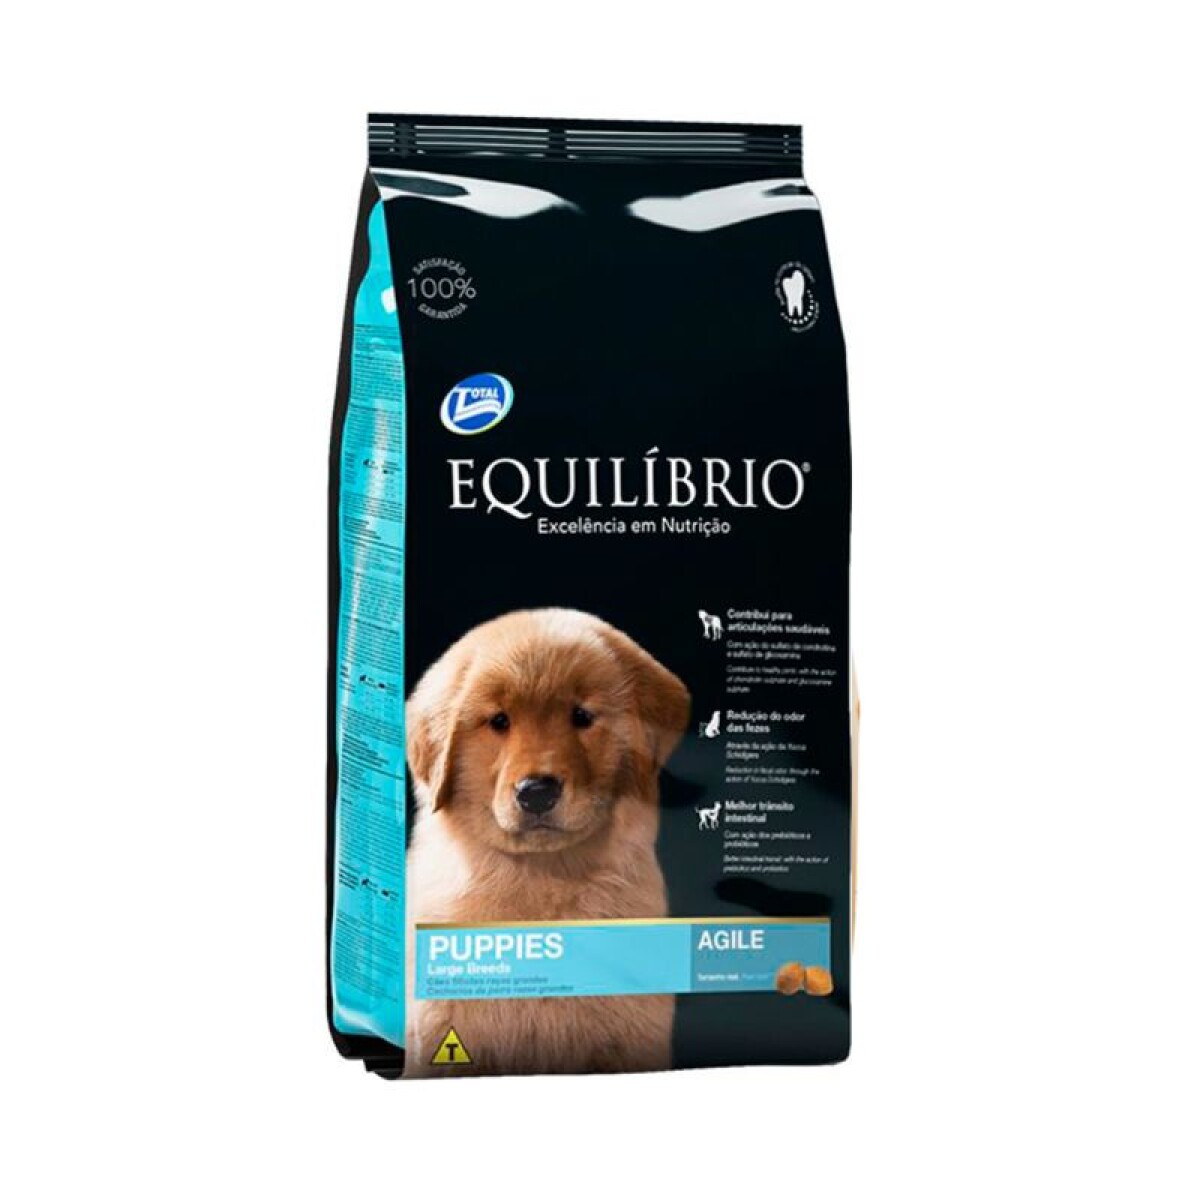 EQUILIBRIO PUPPIES LARGE BREED 15 KGS - Equilibrio Puppies Large Breed 15 Kgs 